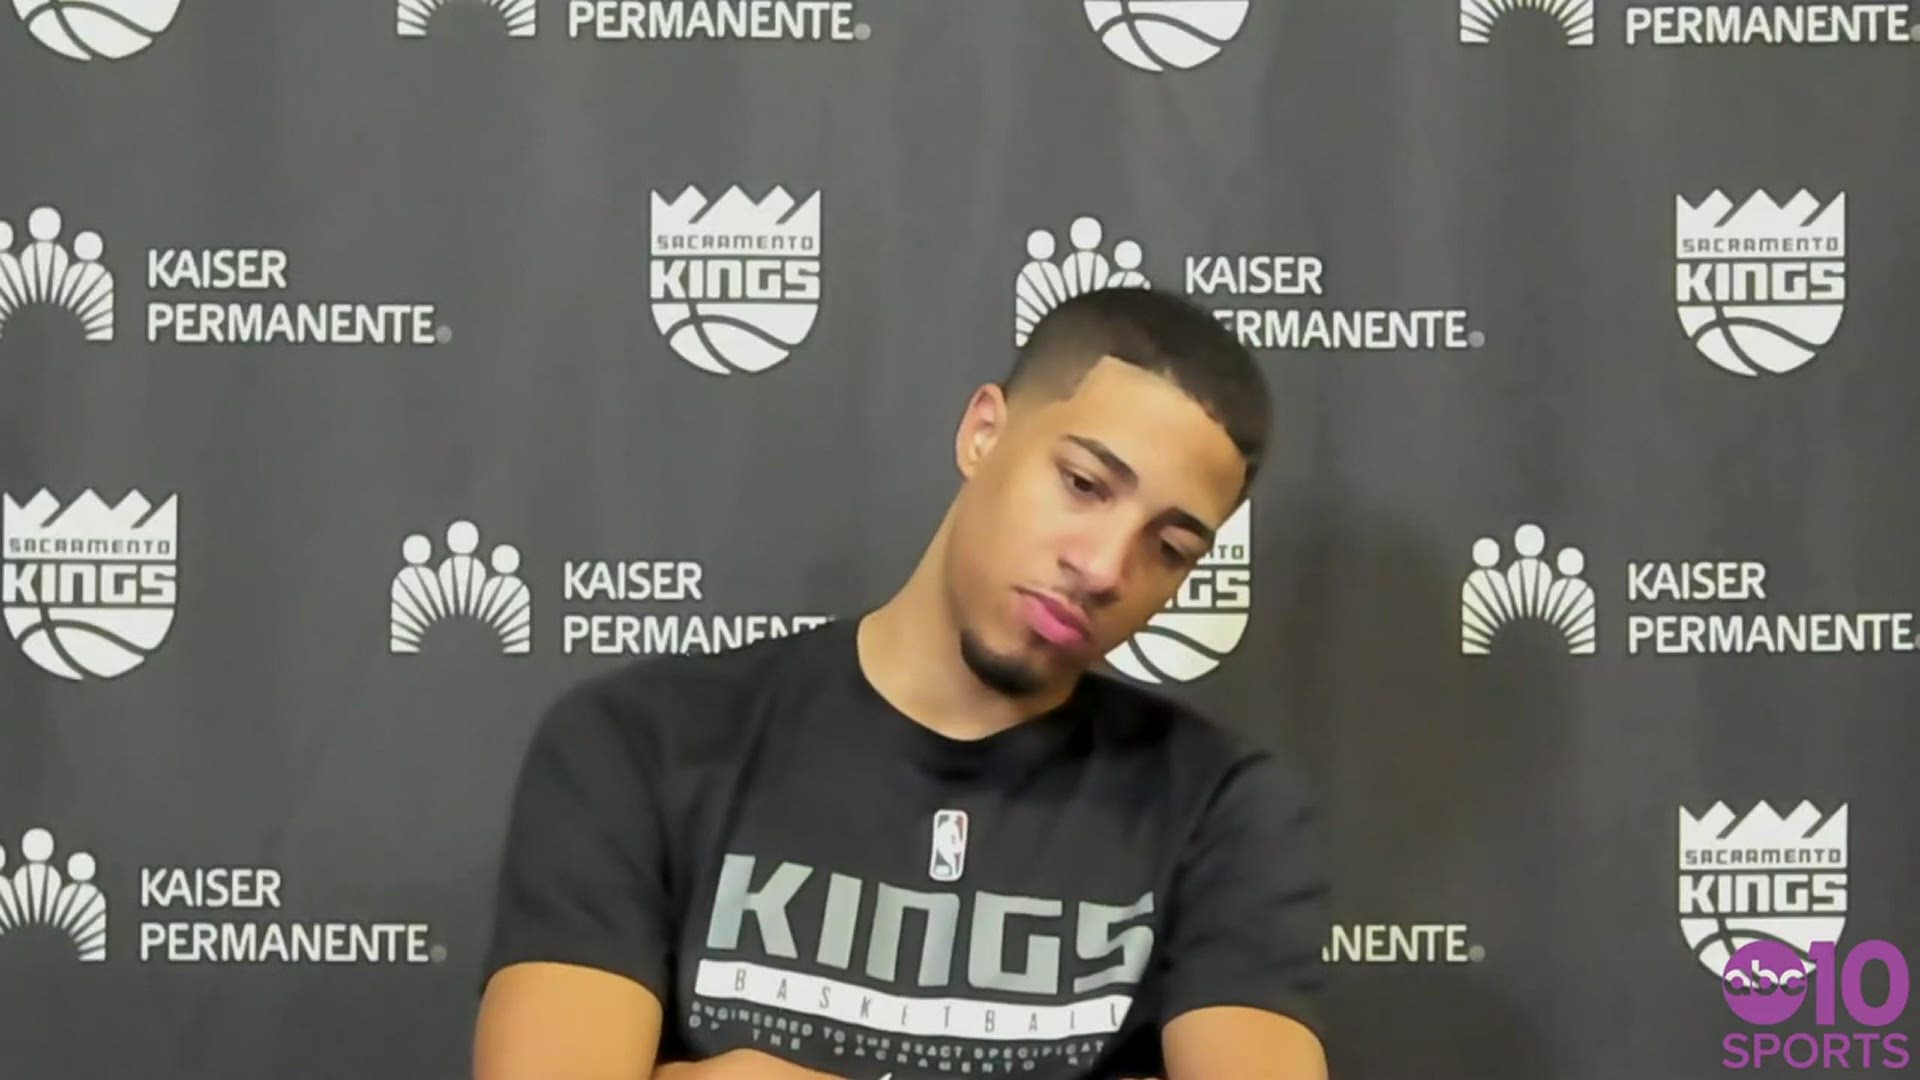 Tyrese Haliburton gives his thoughts on the Kings' third quarter struggles and continued defensive lapses following loss to 115-96 Clippers.